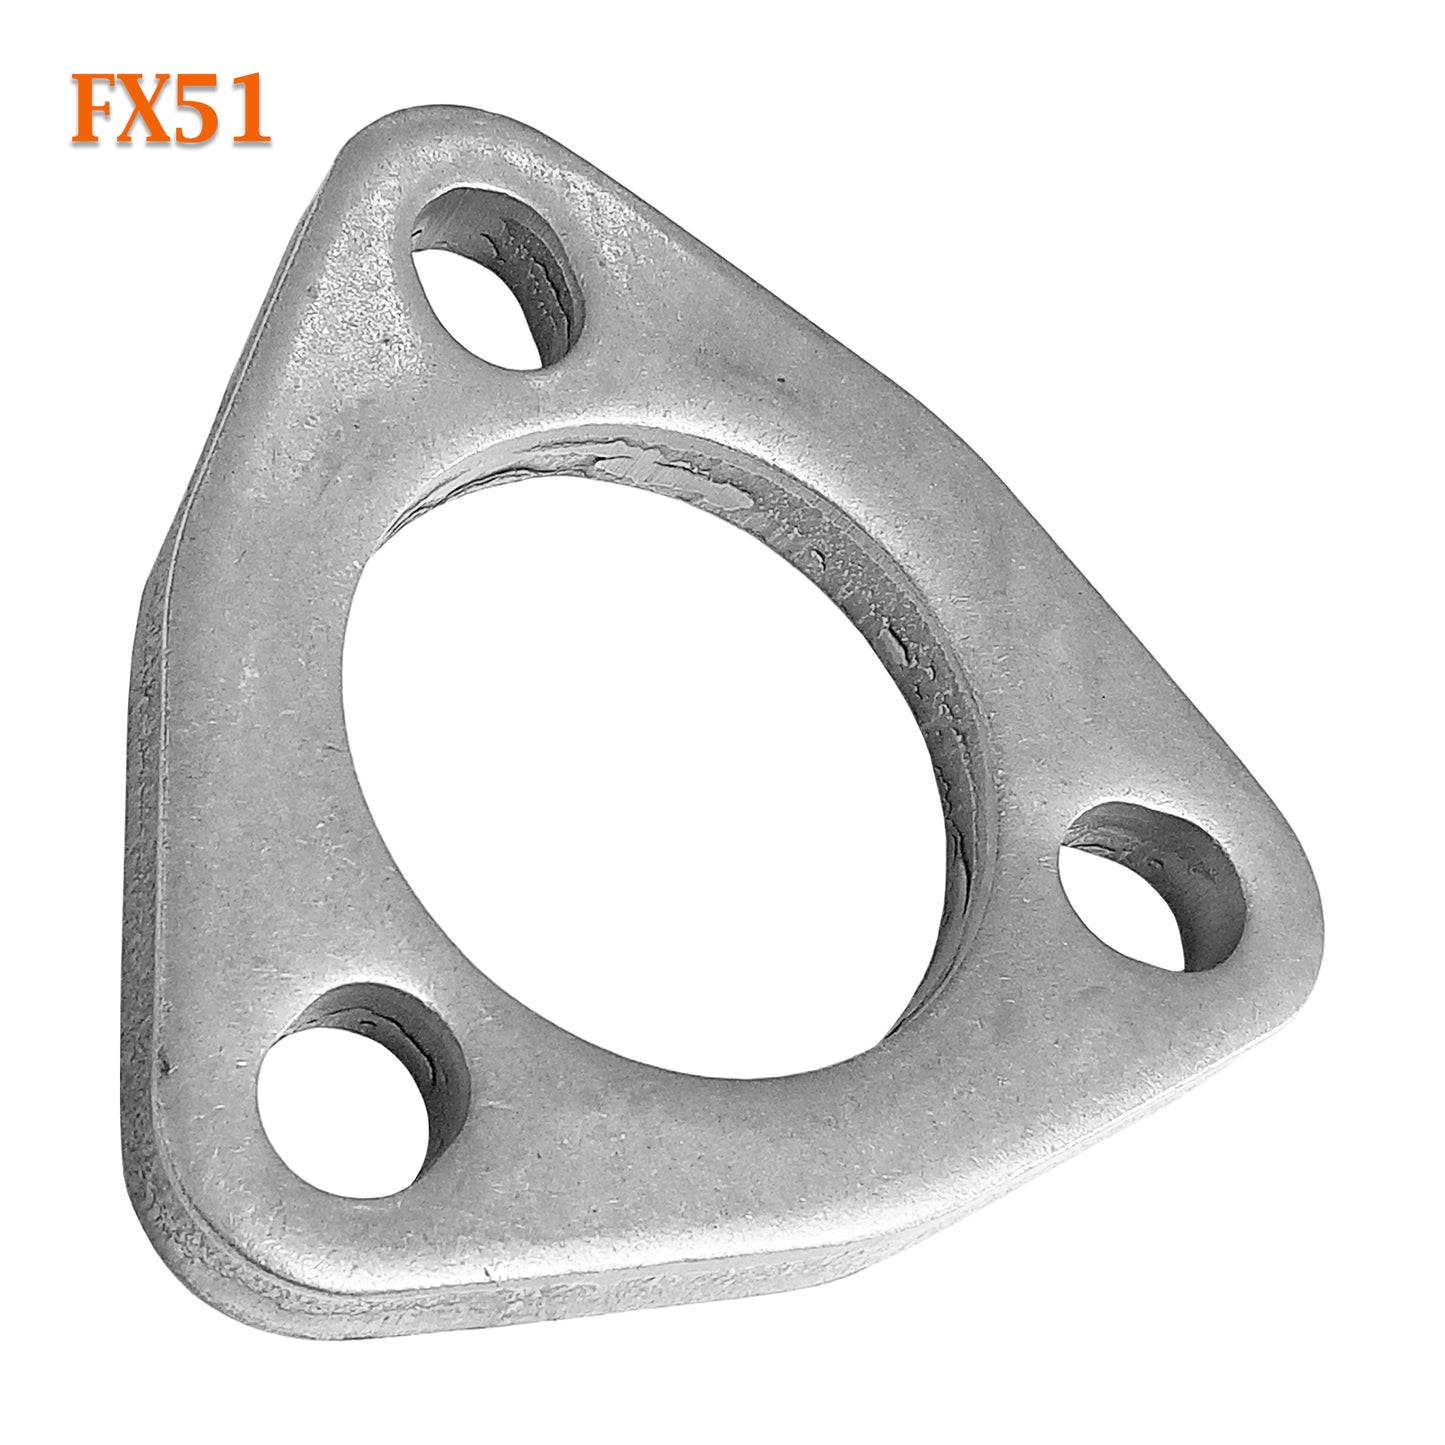 FX51 2 1/16" ID Flat Triangle Three Bolt Slotted Exhaust Flange Fits 2" Pipe